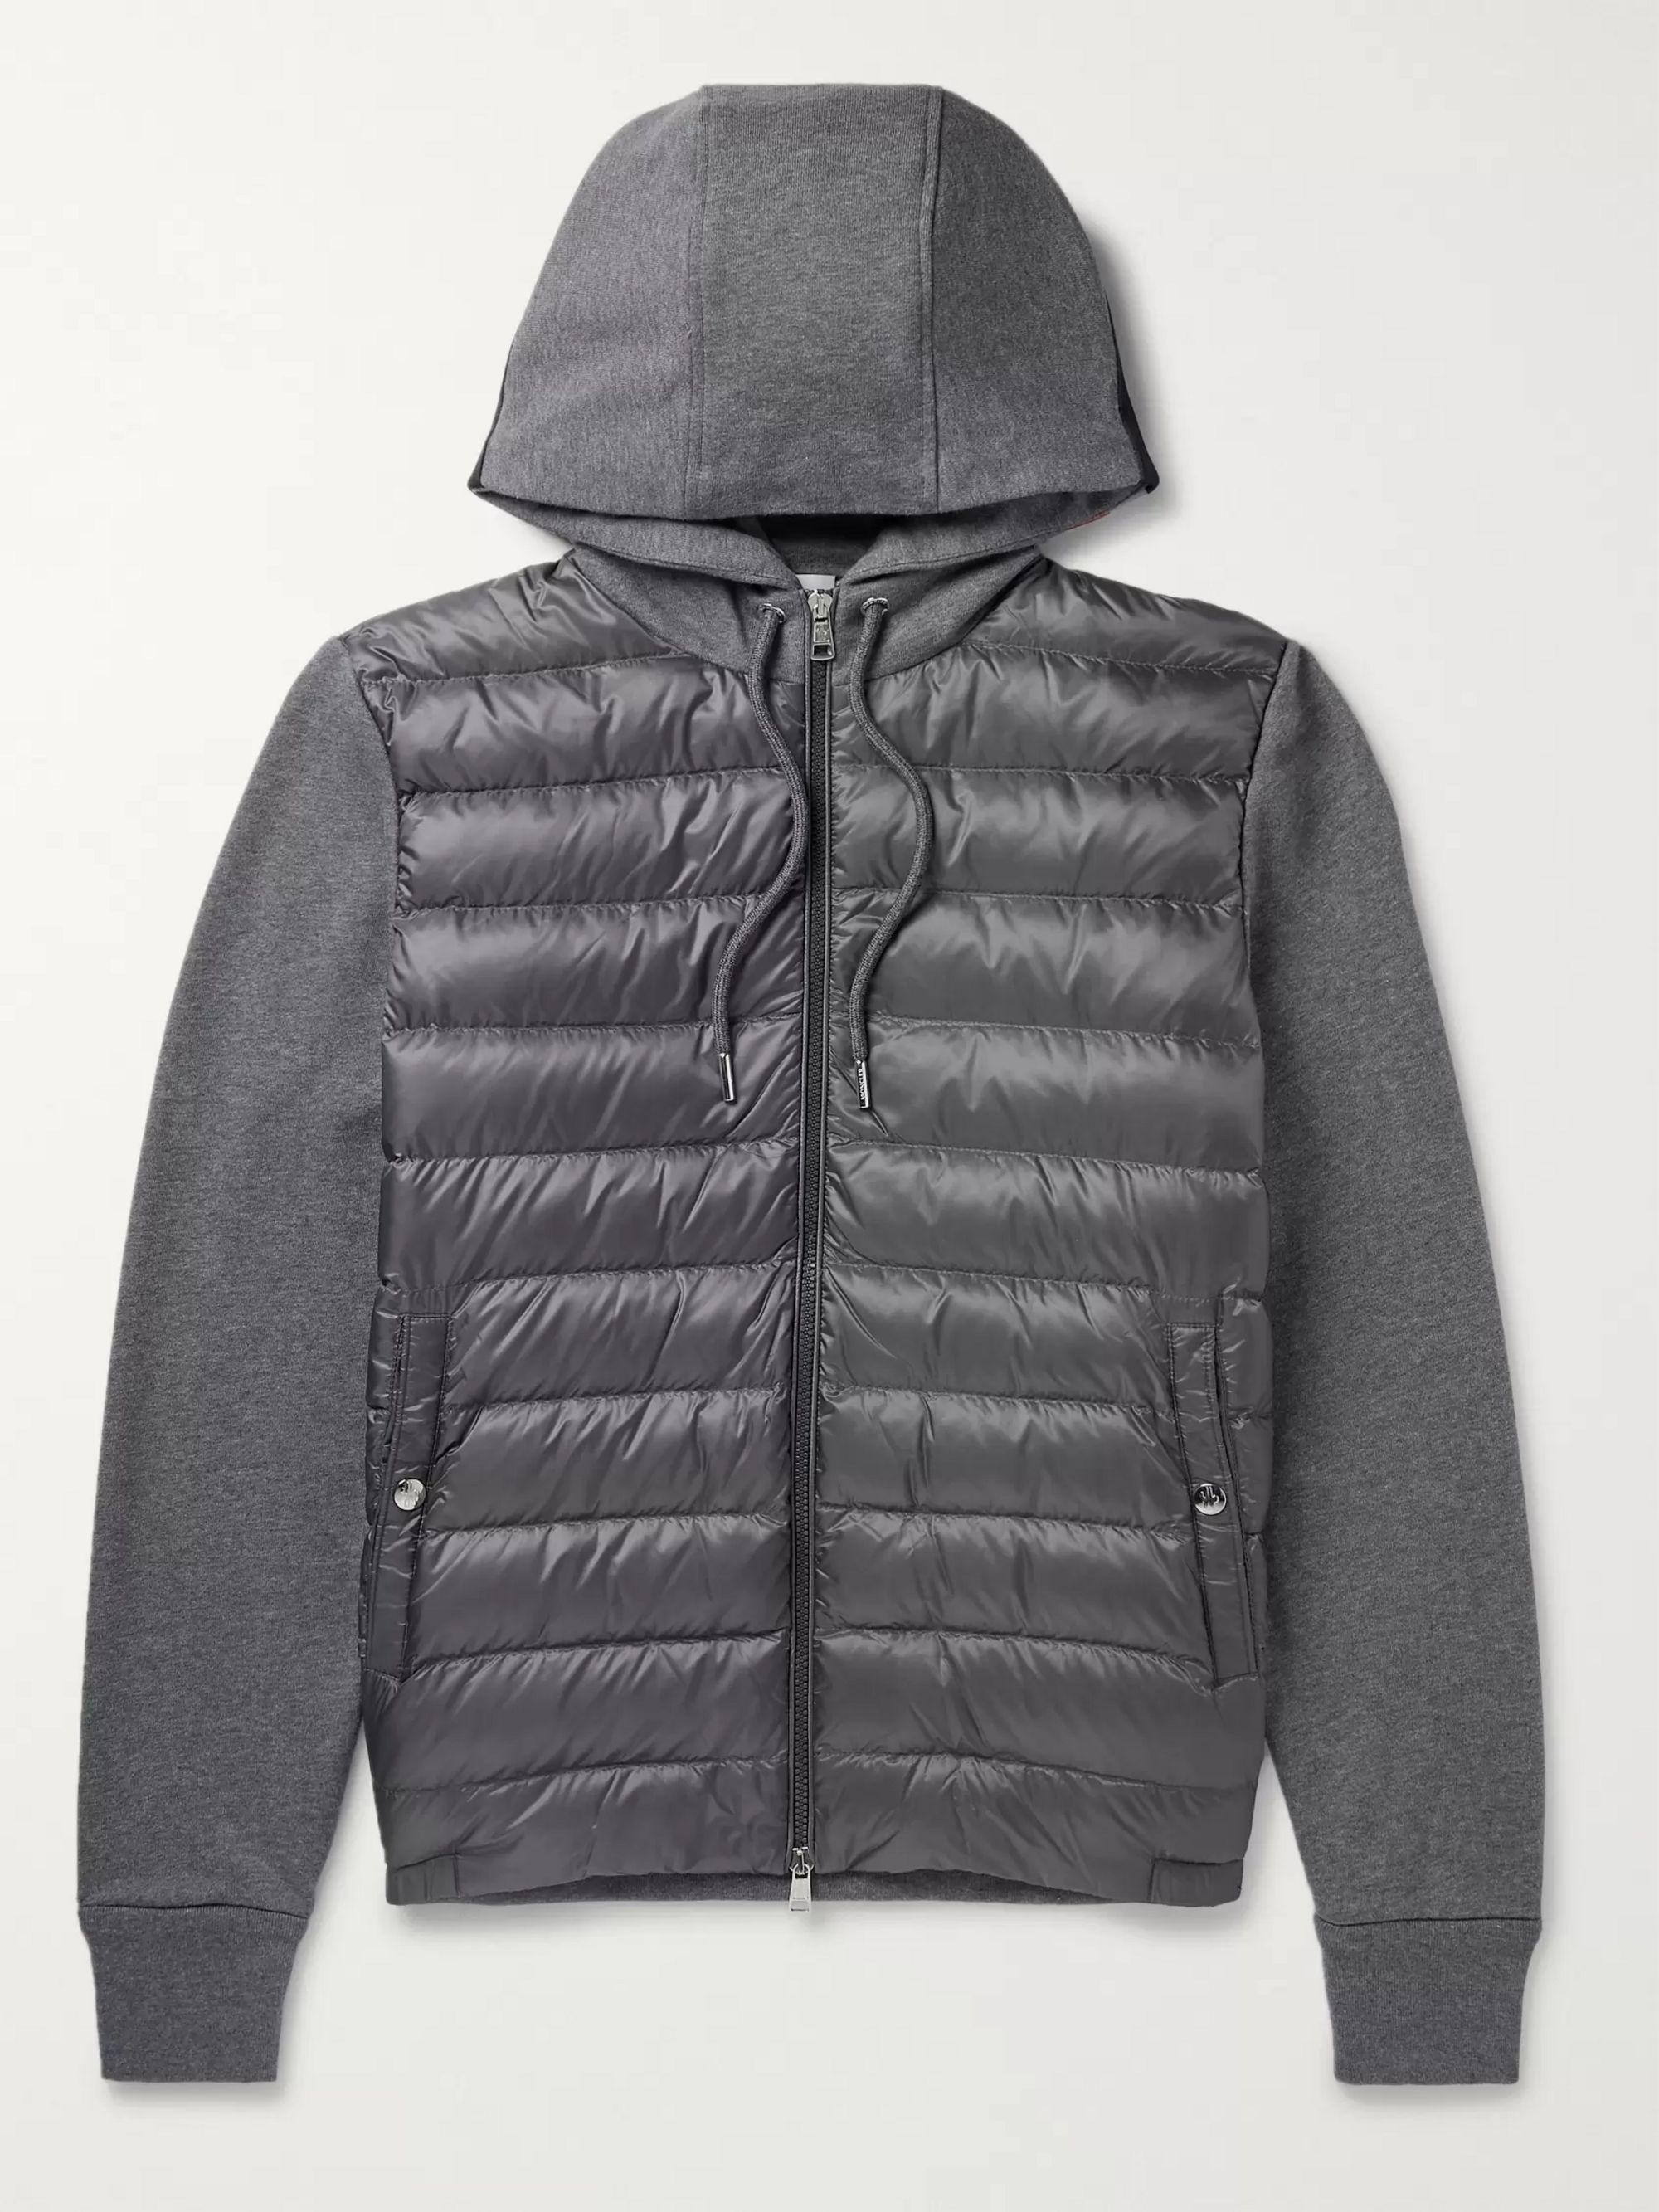 moncler jacket without hood